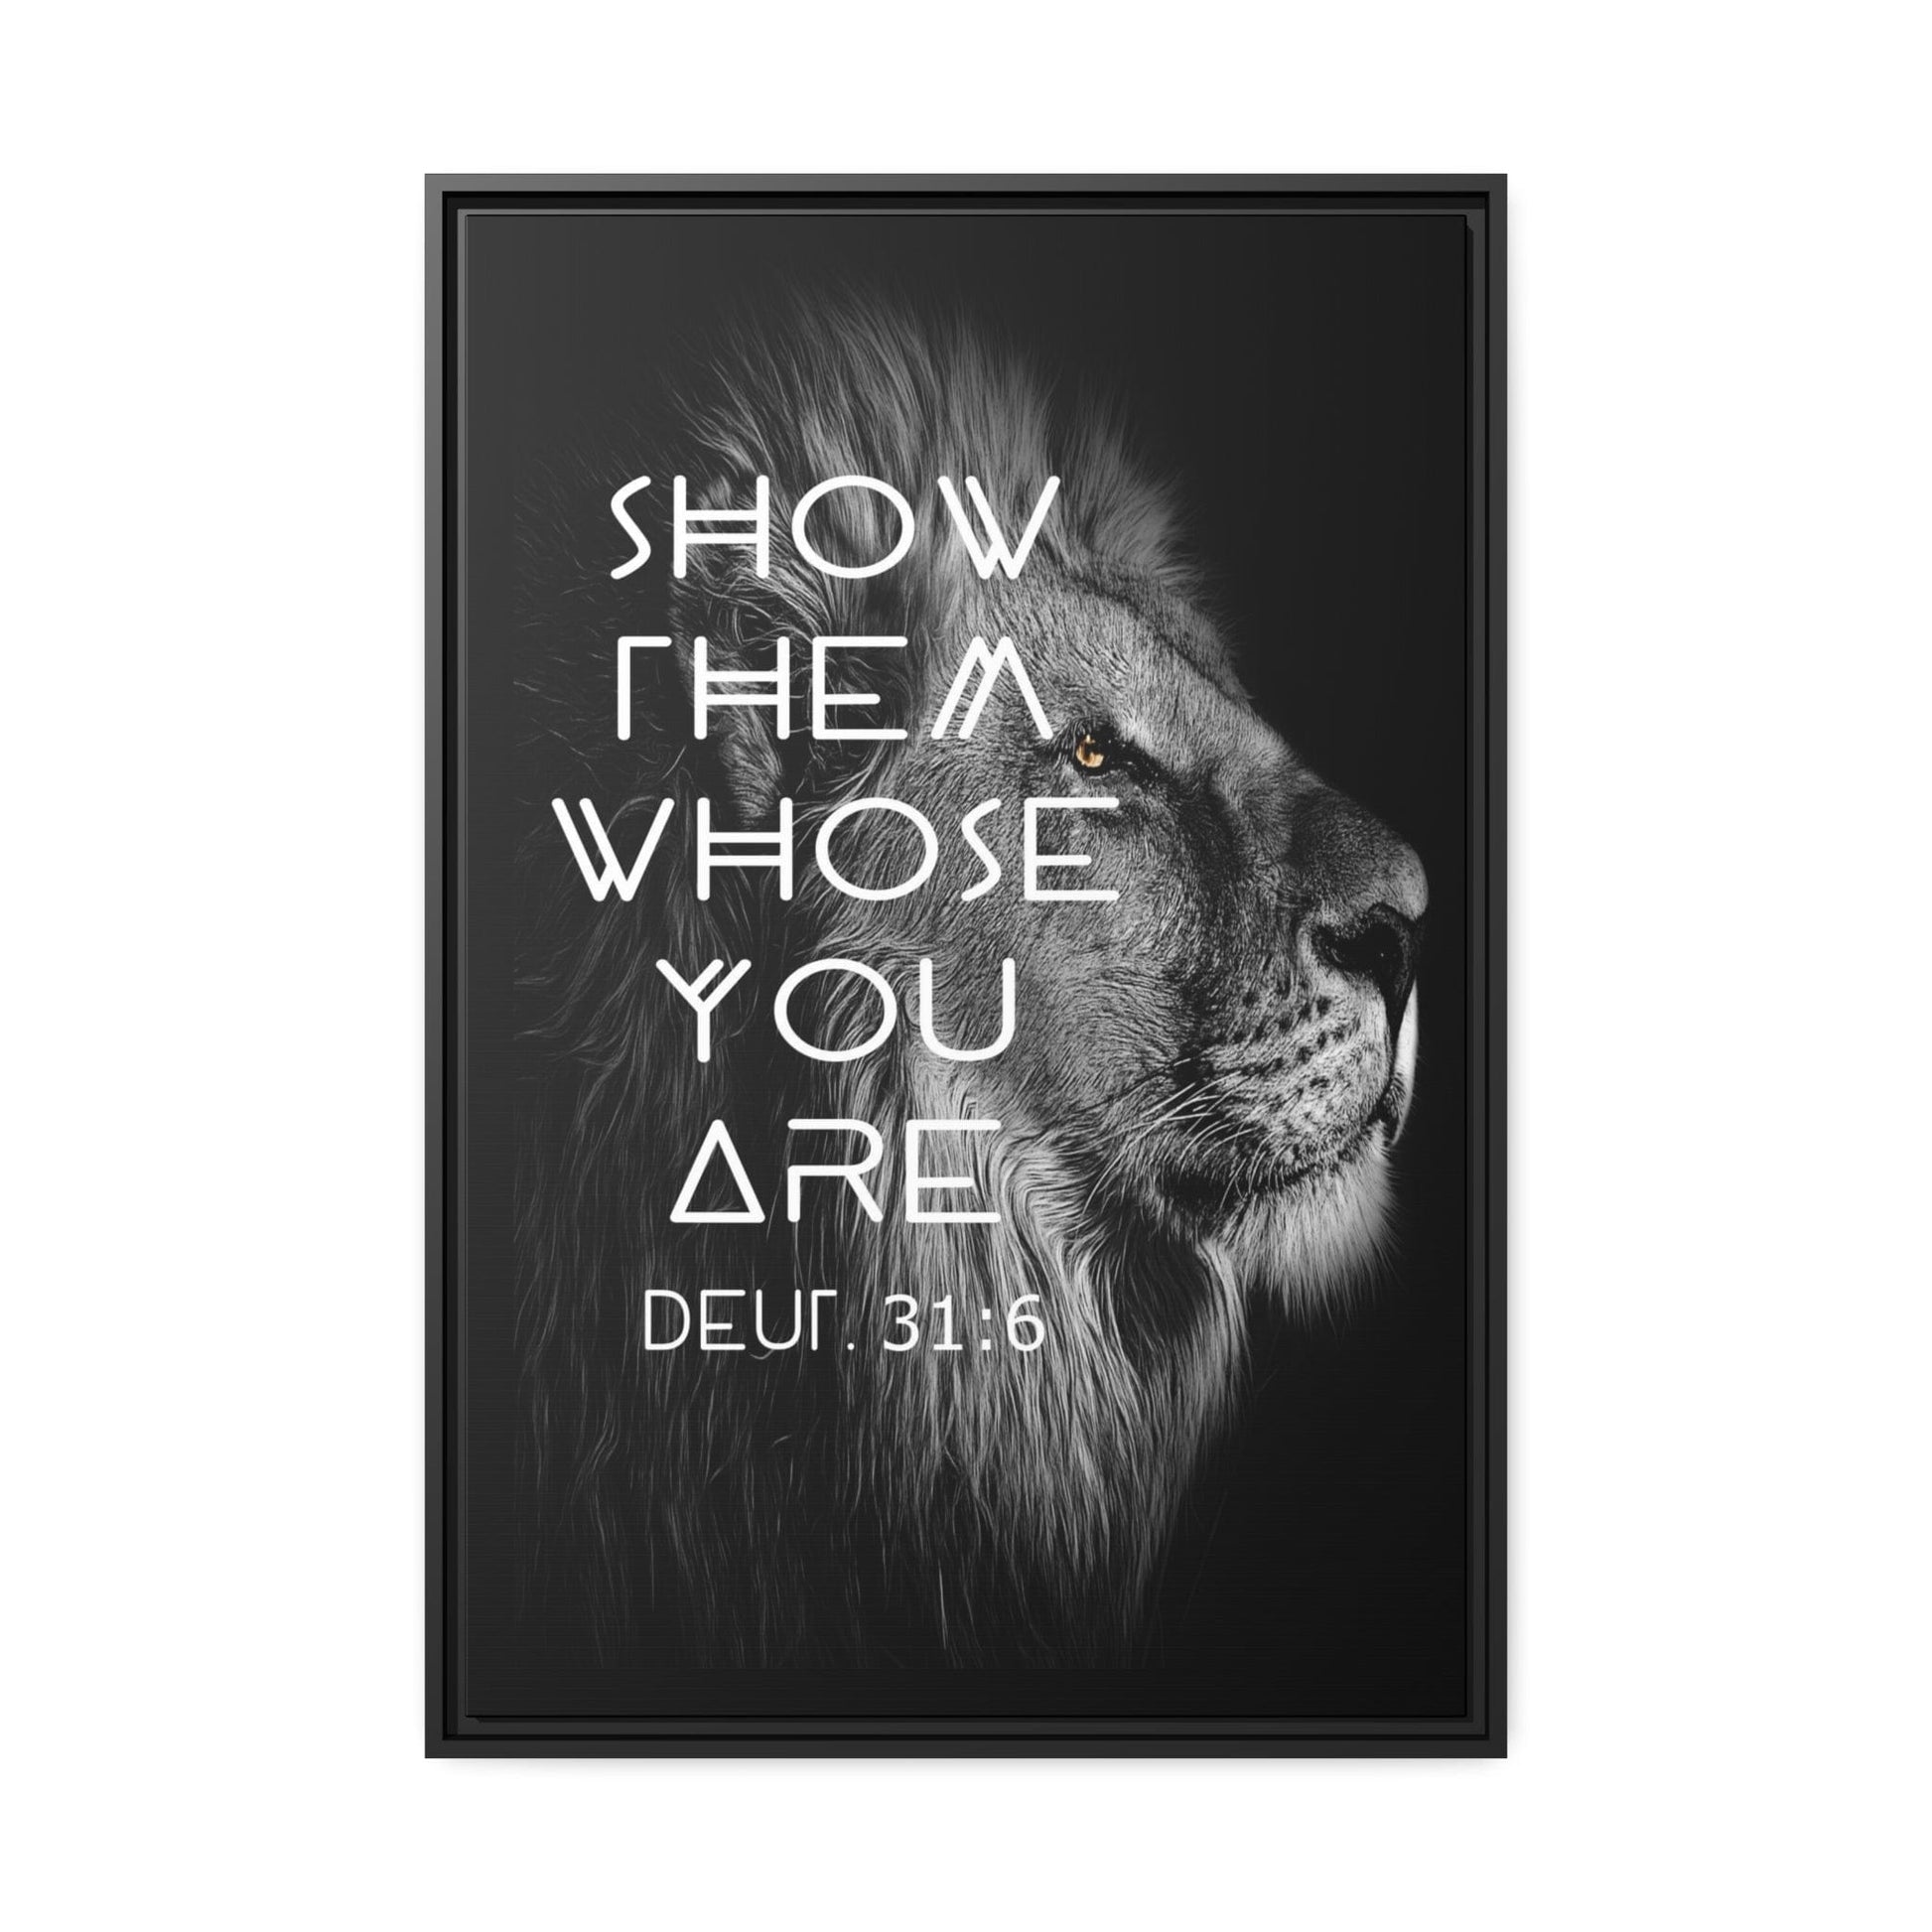 Printify Canvas 24″ x 36″ (Vertical) / Black / 1.25" Show Them Whose You Are - Deuteronomy 31:6 Christian Canvas Wall Art